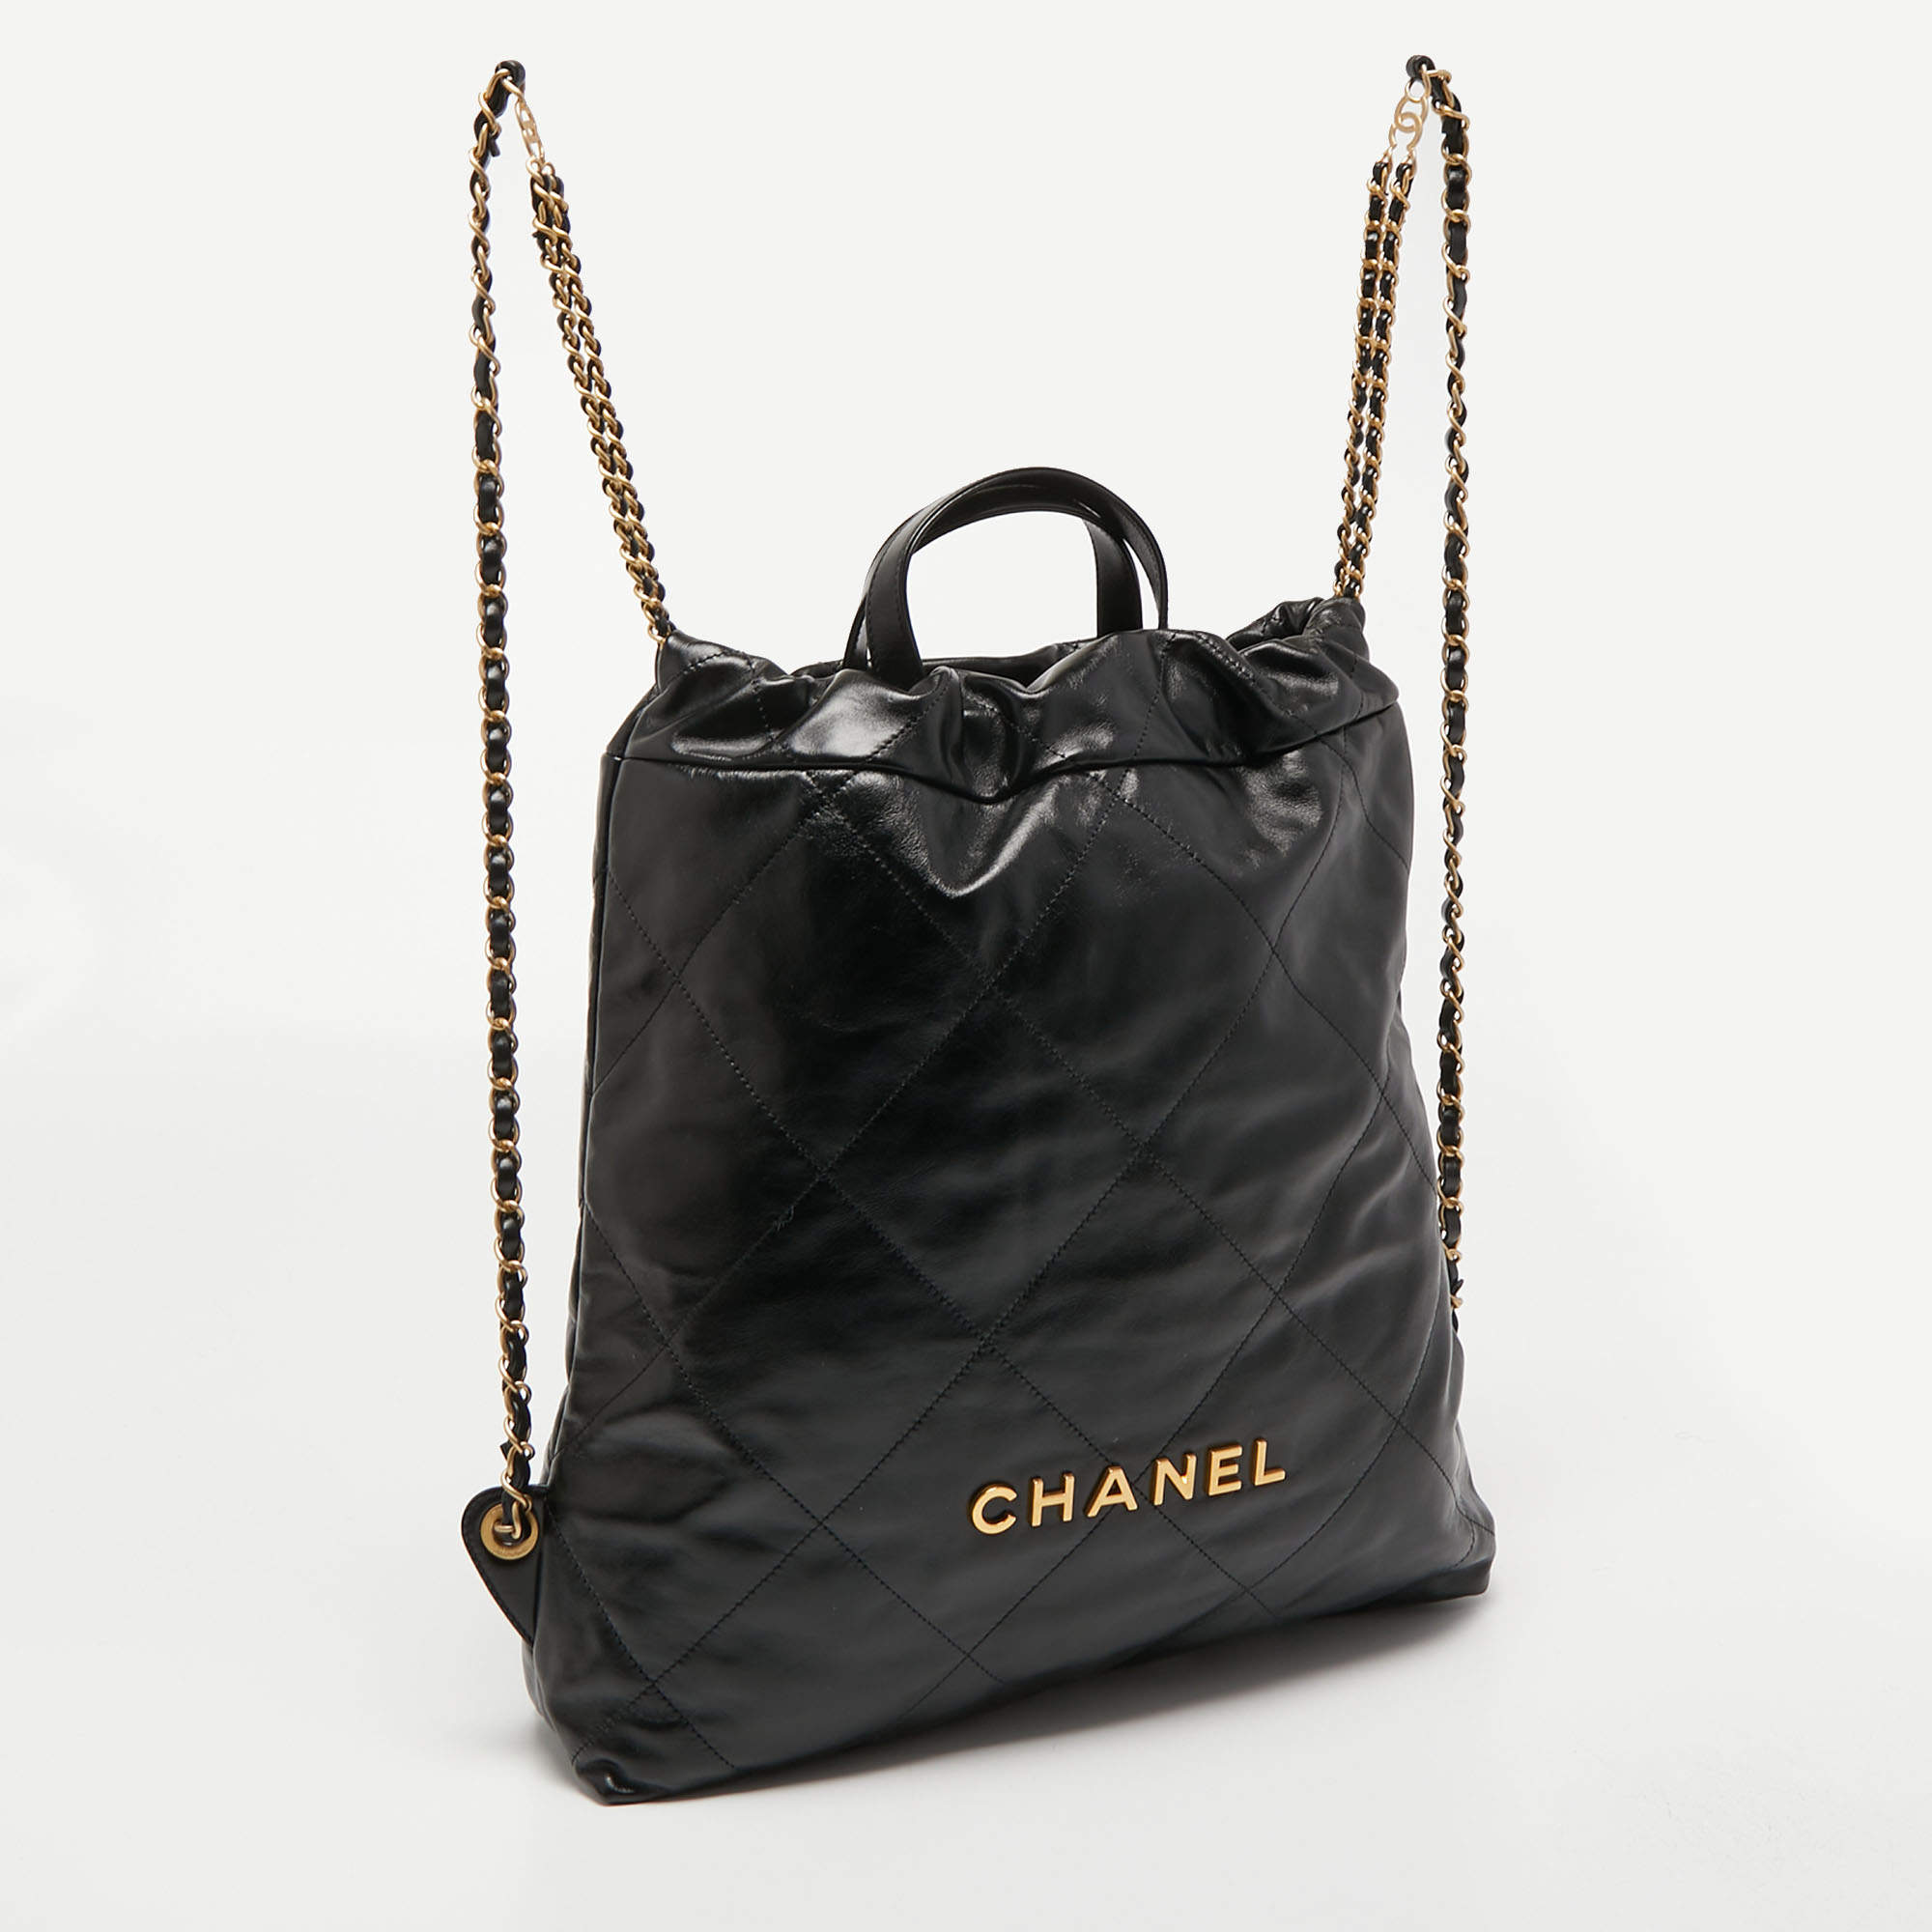 Chanel Black Shiny Quilted Leather 22 Backpack